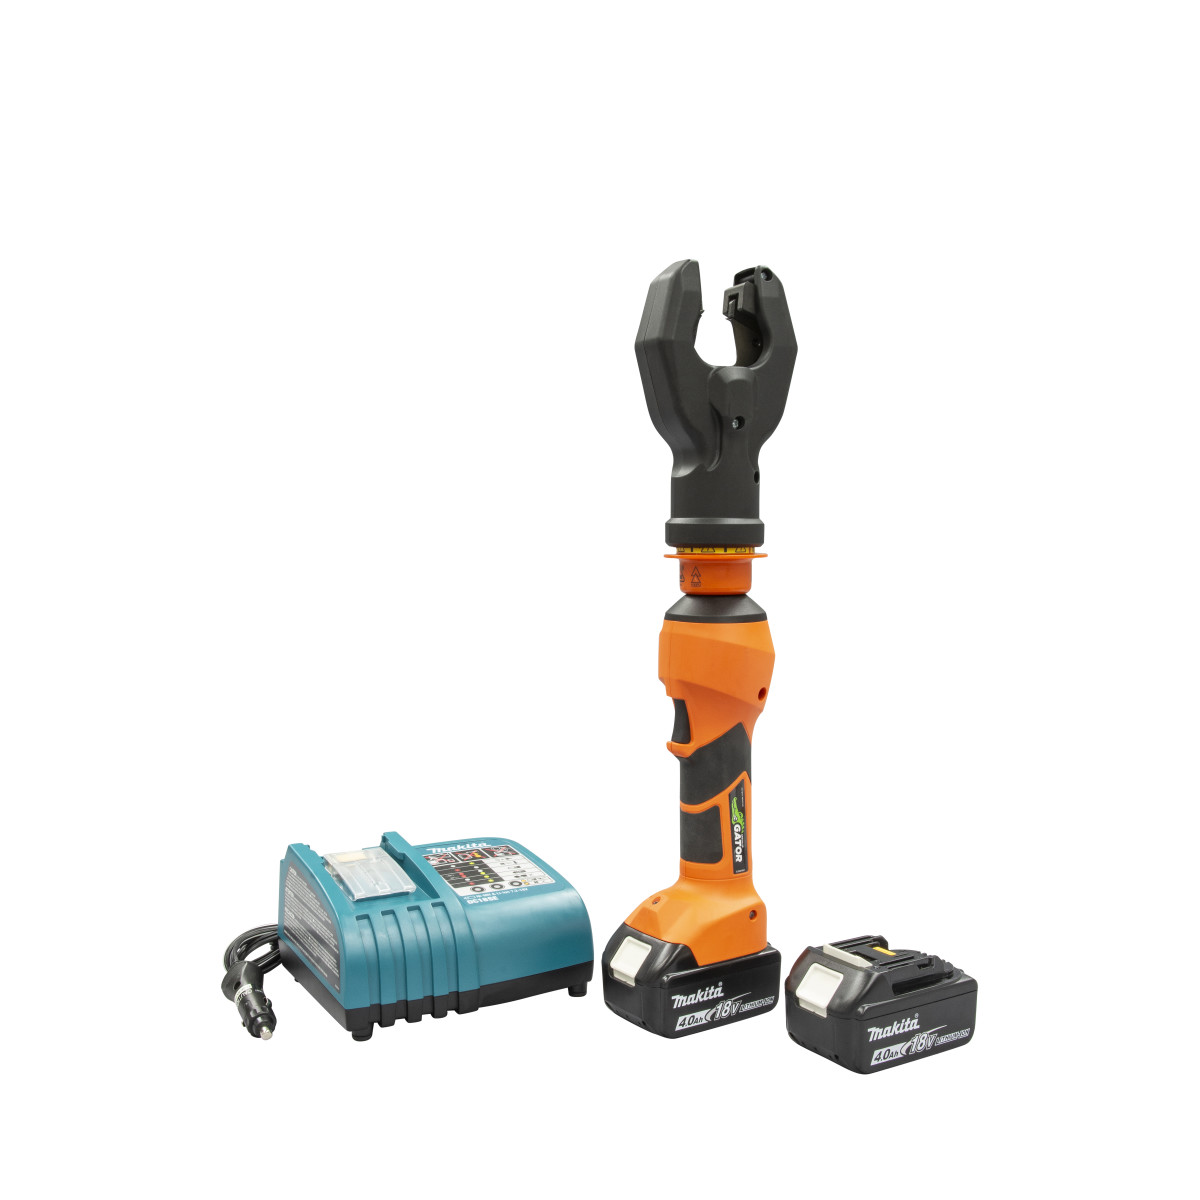 25 mm Insulated Cable Cutter with 12V Charger. 1000v Insulation. Brush guarded head - helps avoid accidental contact with conductors. Tri-insulation barrier - Provides three (3) layers of protection (Patent Pending). 360° Rotating head  - For improved agility in confined work spaces. Double -tap safety feature option -Prevents unintentional operation. Bluetooth® communication